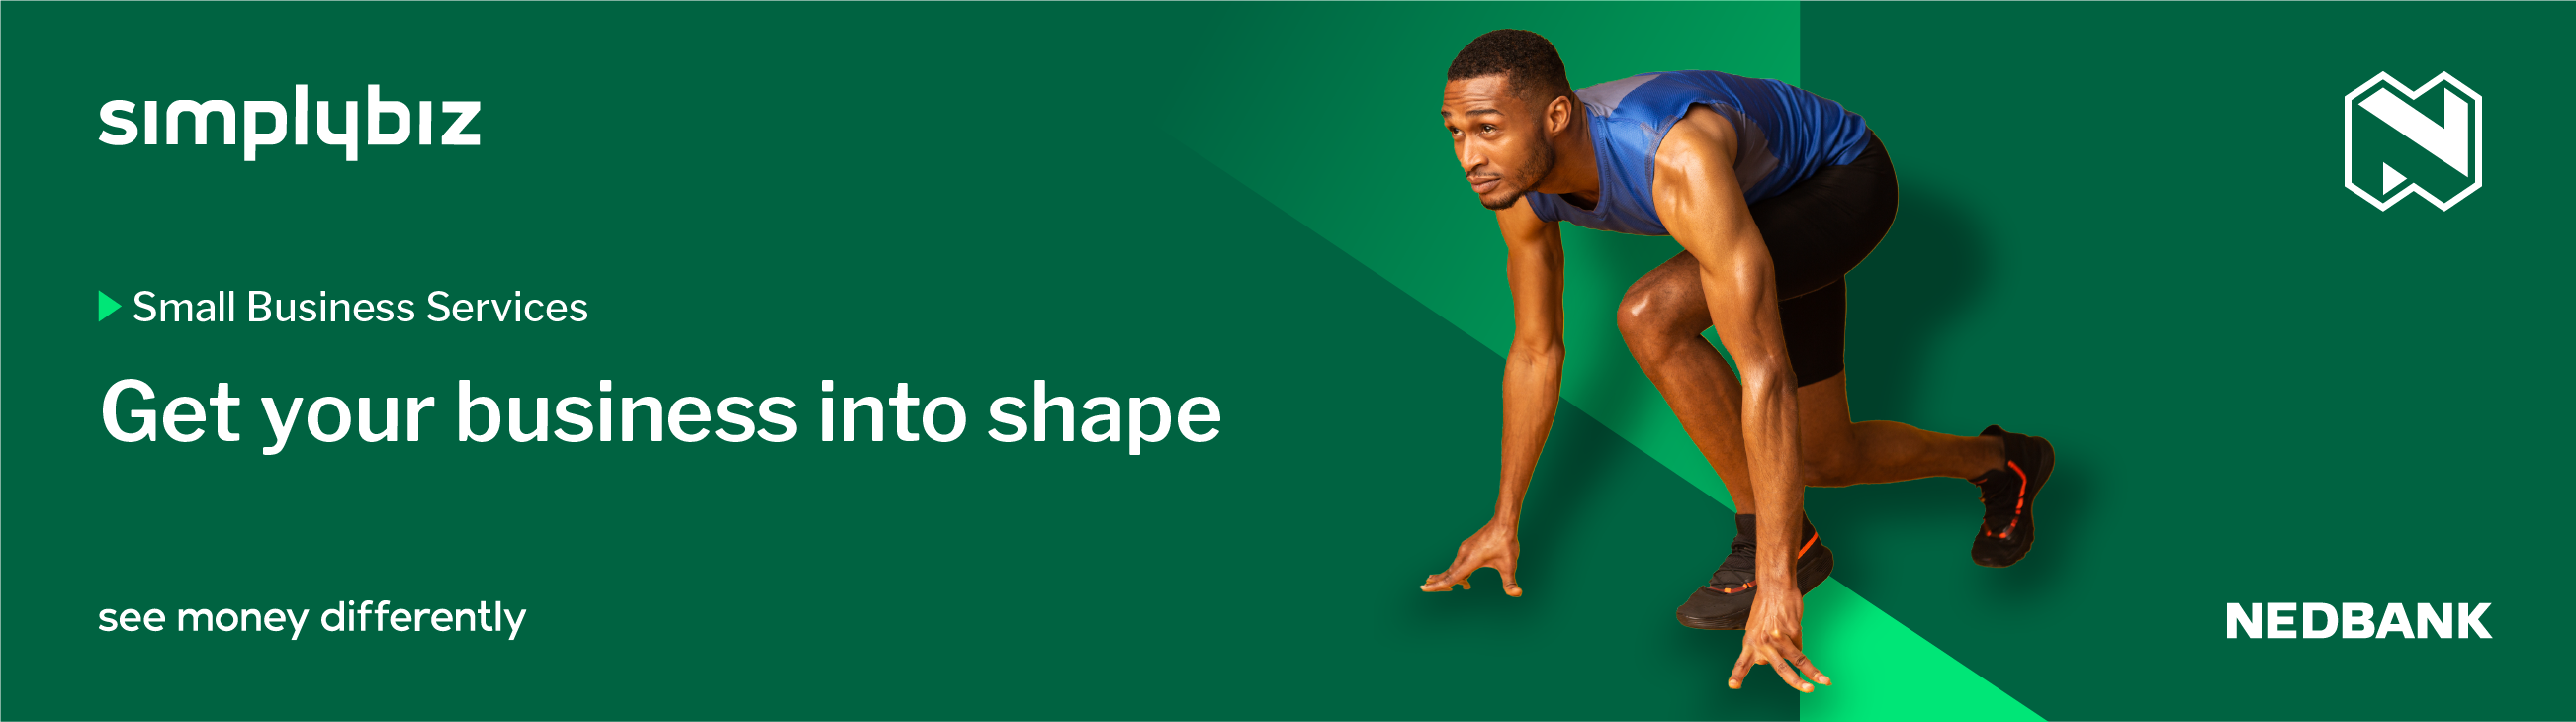 Get_into_shape_article_banner.png